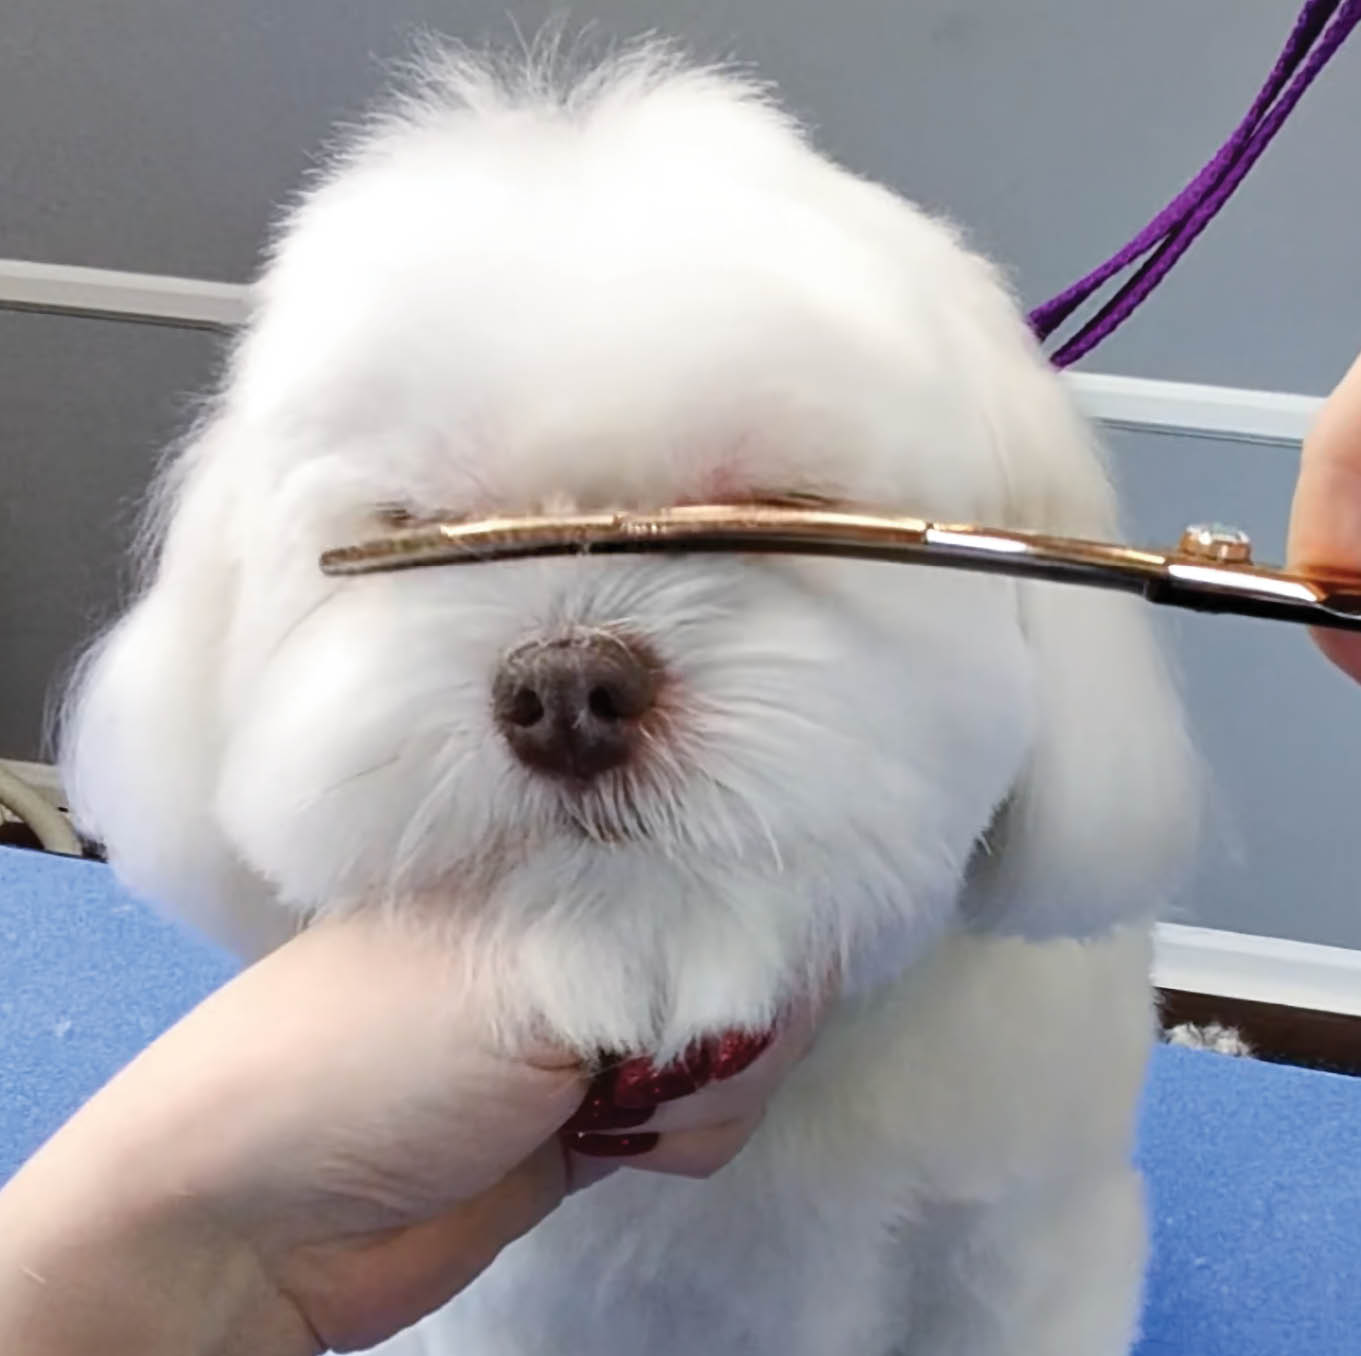 combing a dog's transition points on their face to trim it evenly